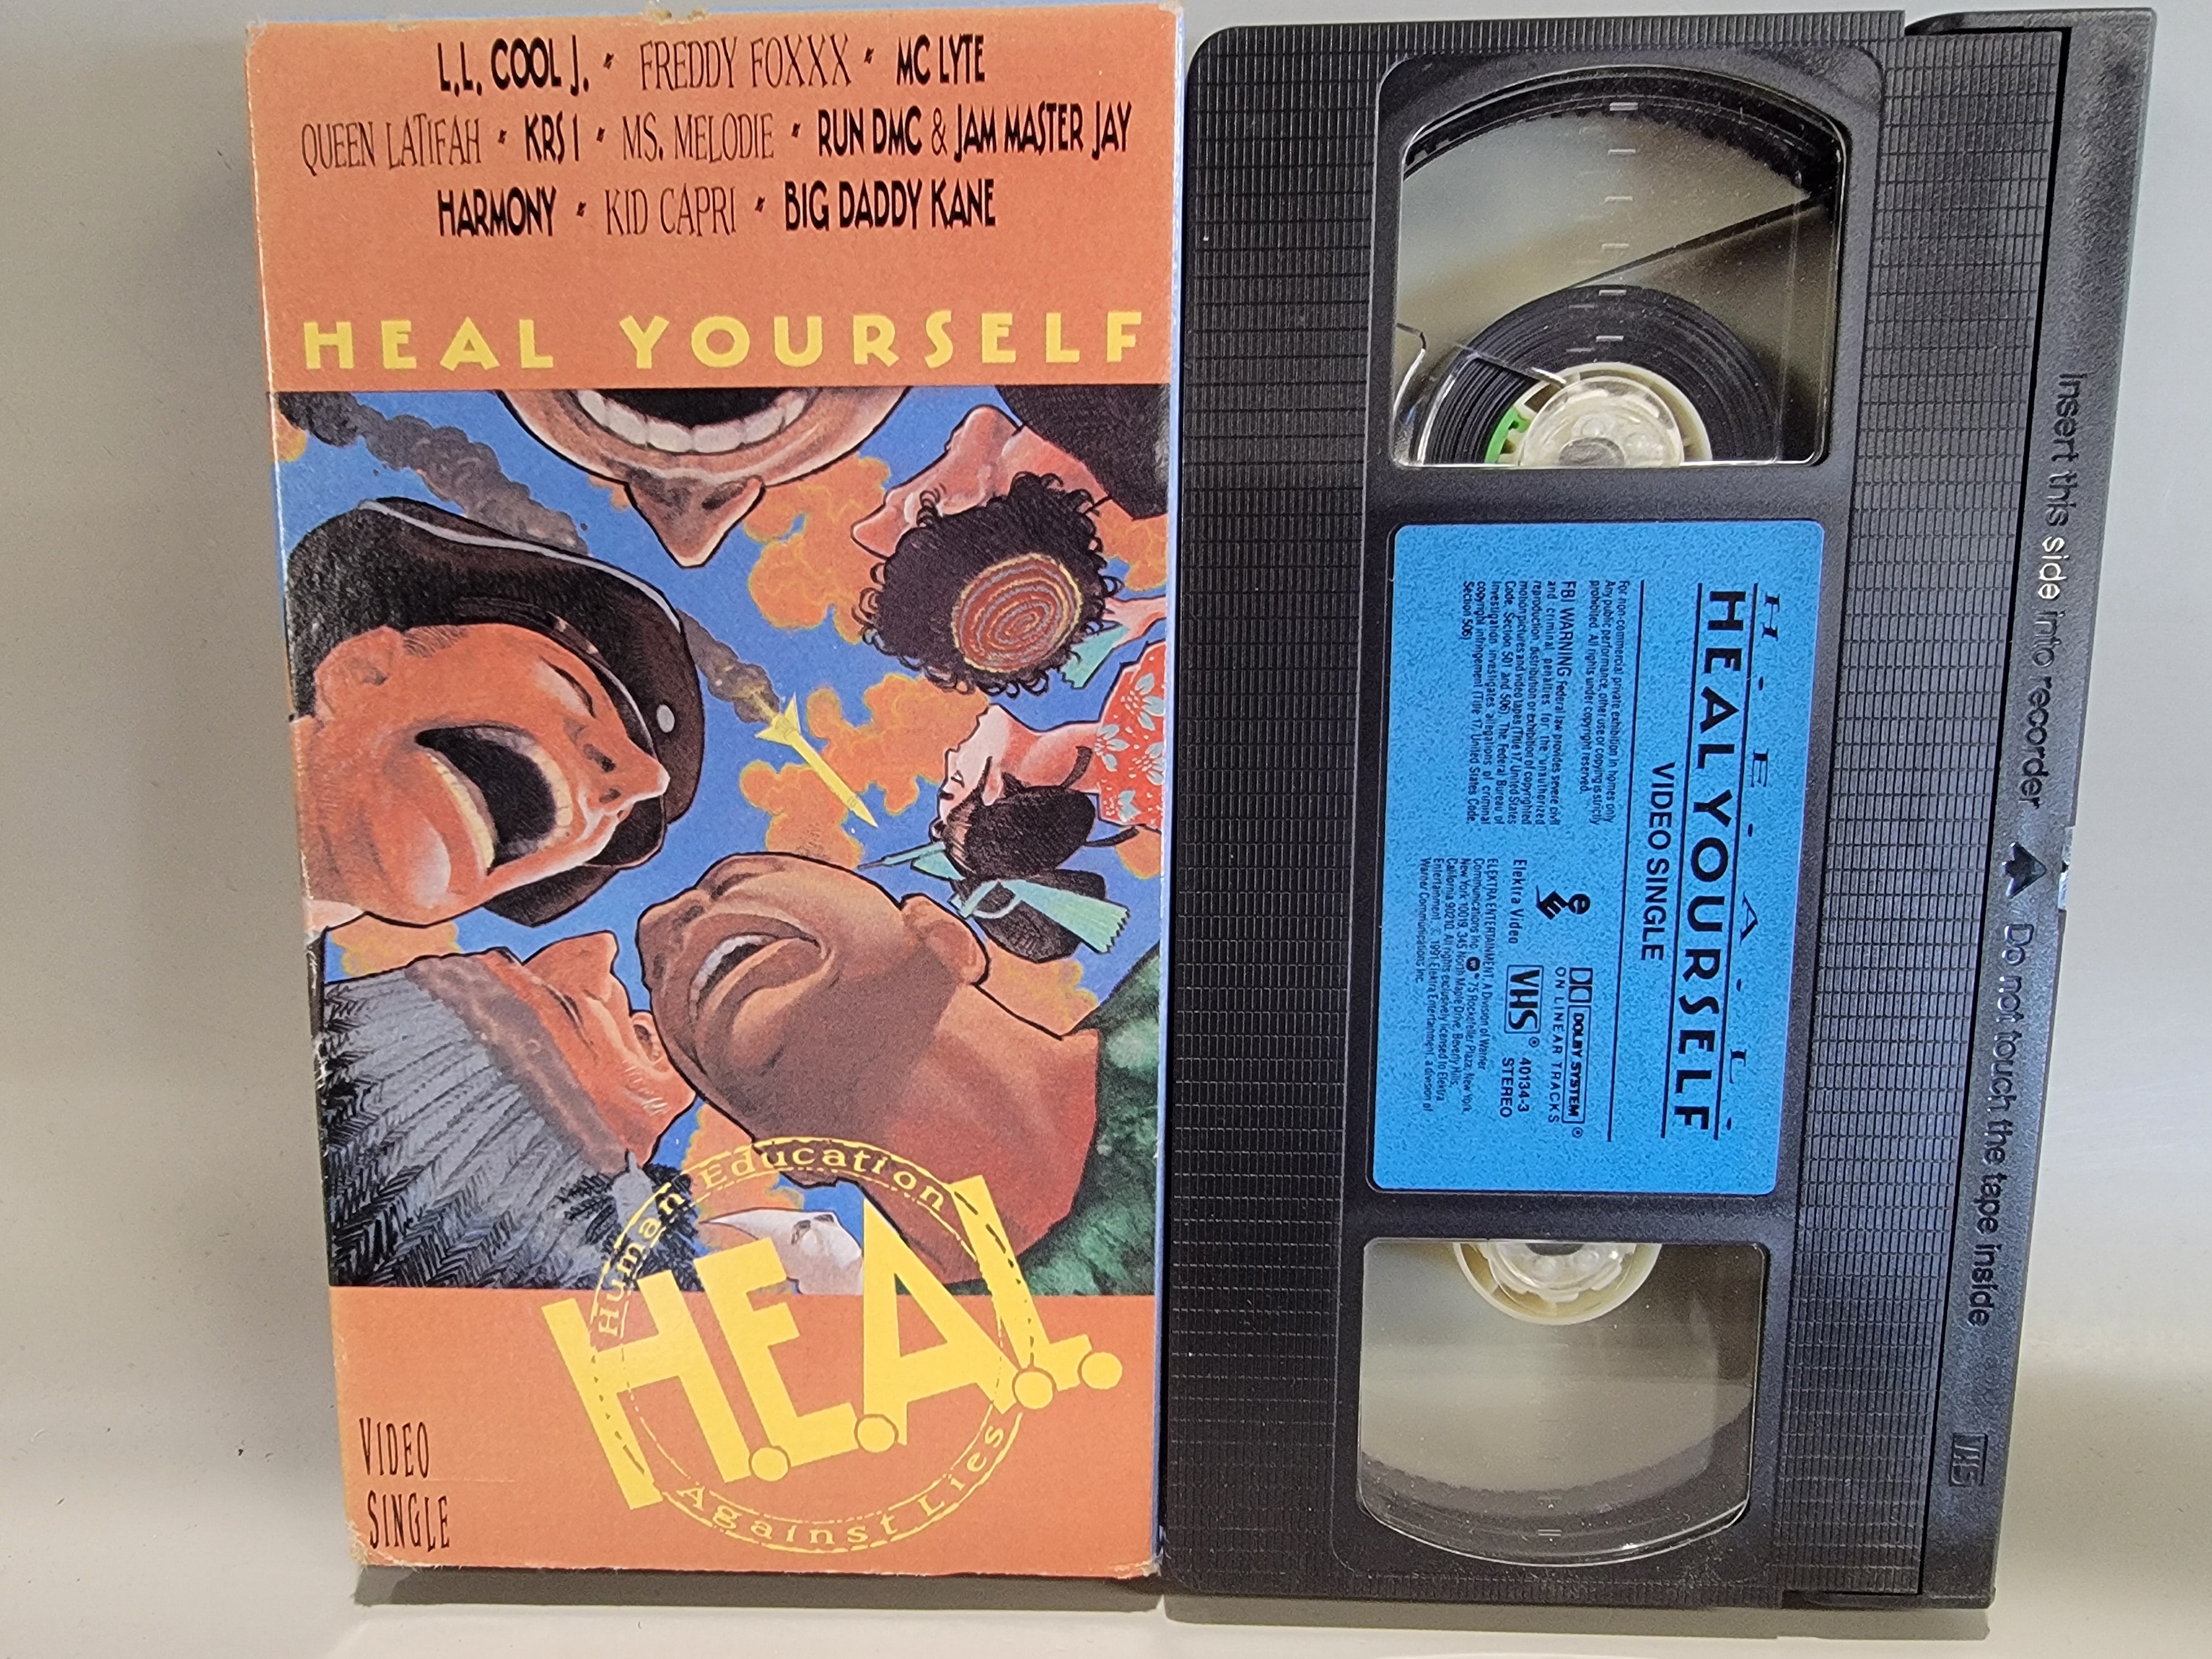 HEAL YOURSELF VHS [USED]